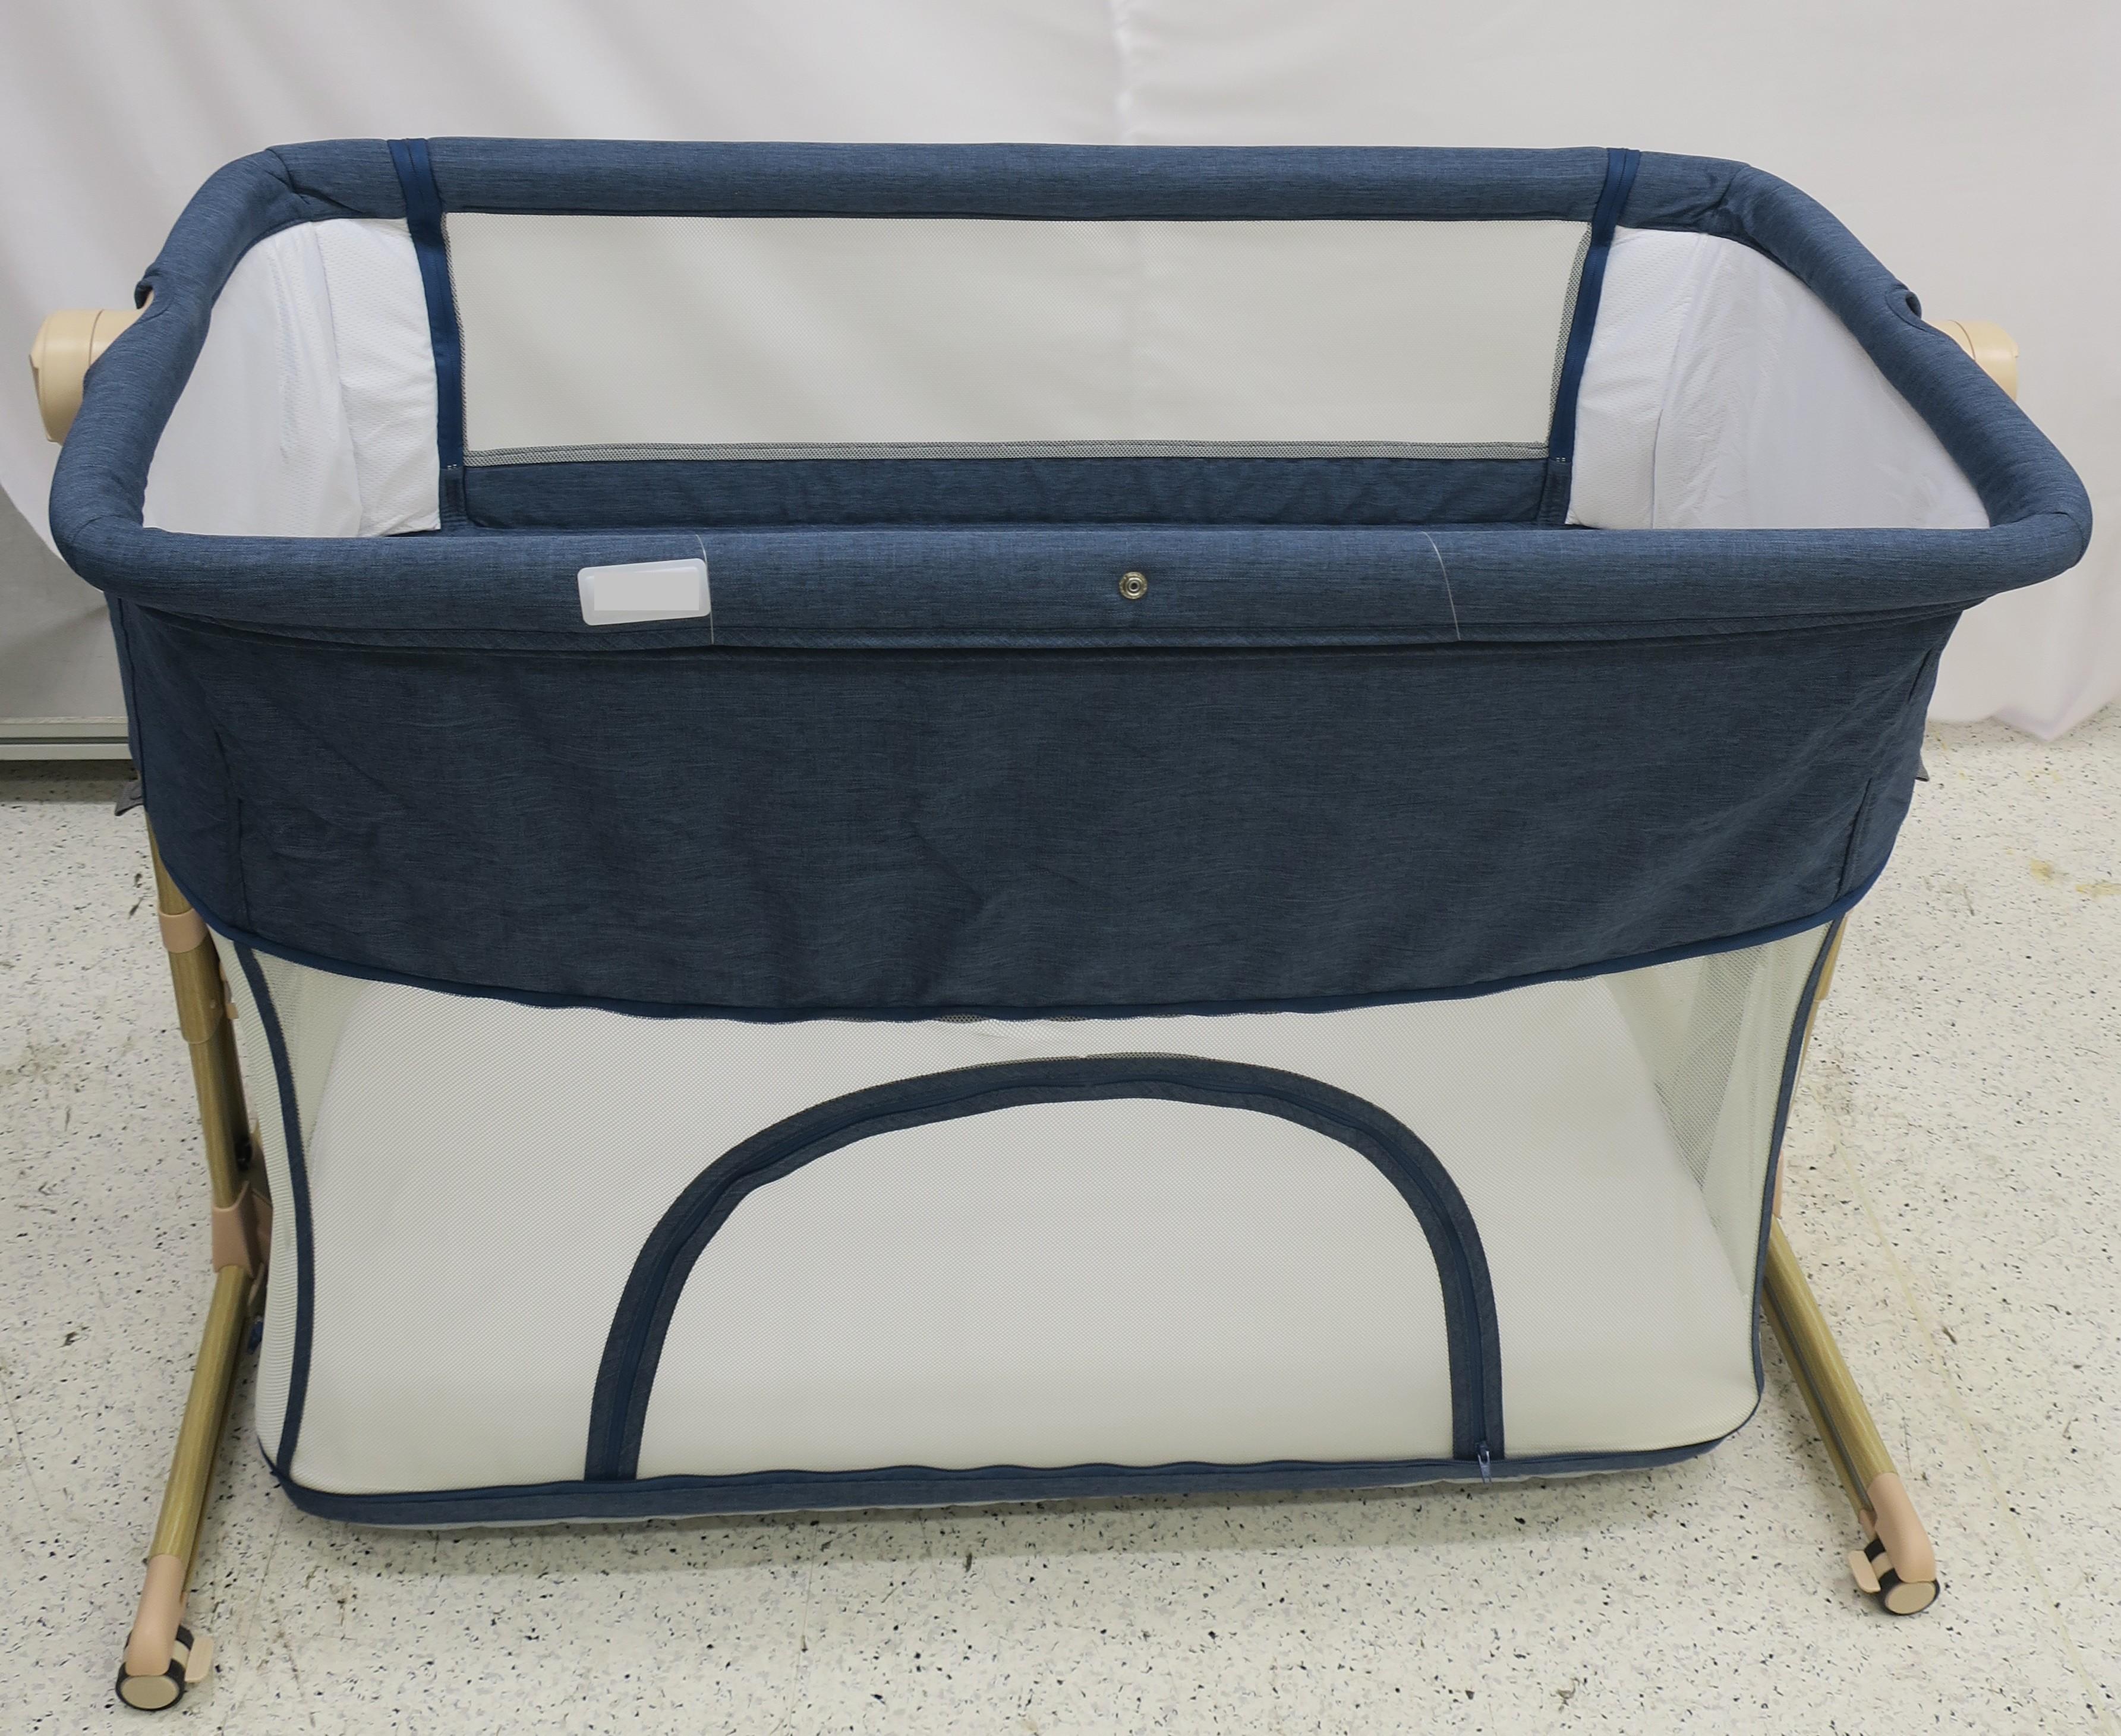 Hong Kong Customs today (March 31) reminded members of the public to stay alert to an unsafe model of a cot. Test results indicated that the cot might pose a safety hazard. Photo shows the cot concerned.